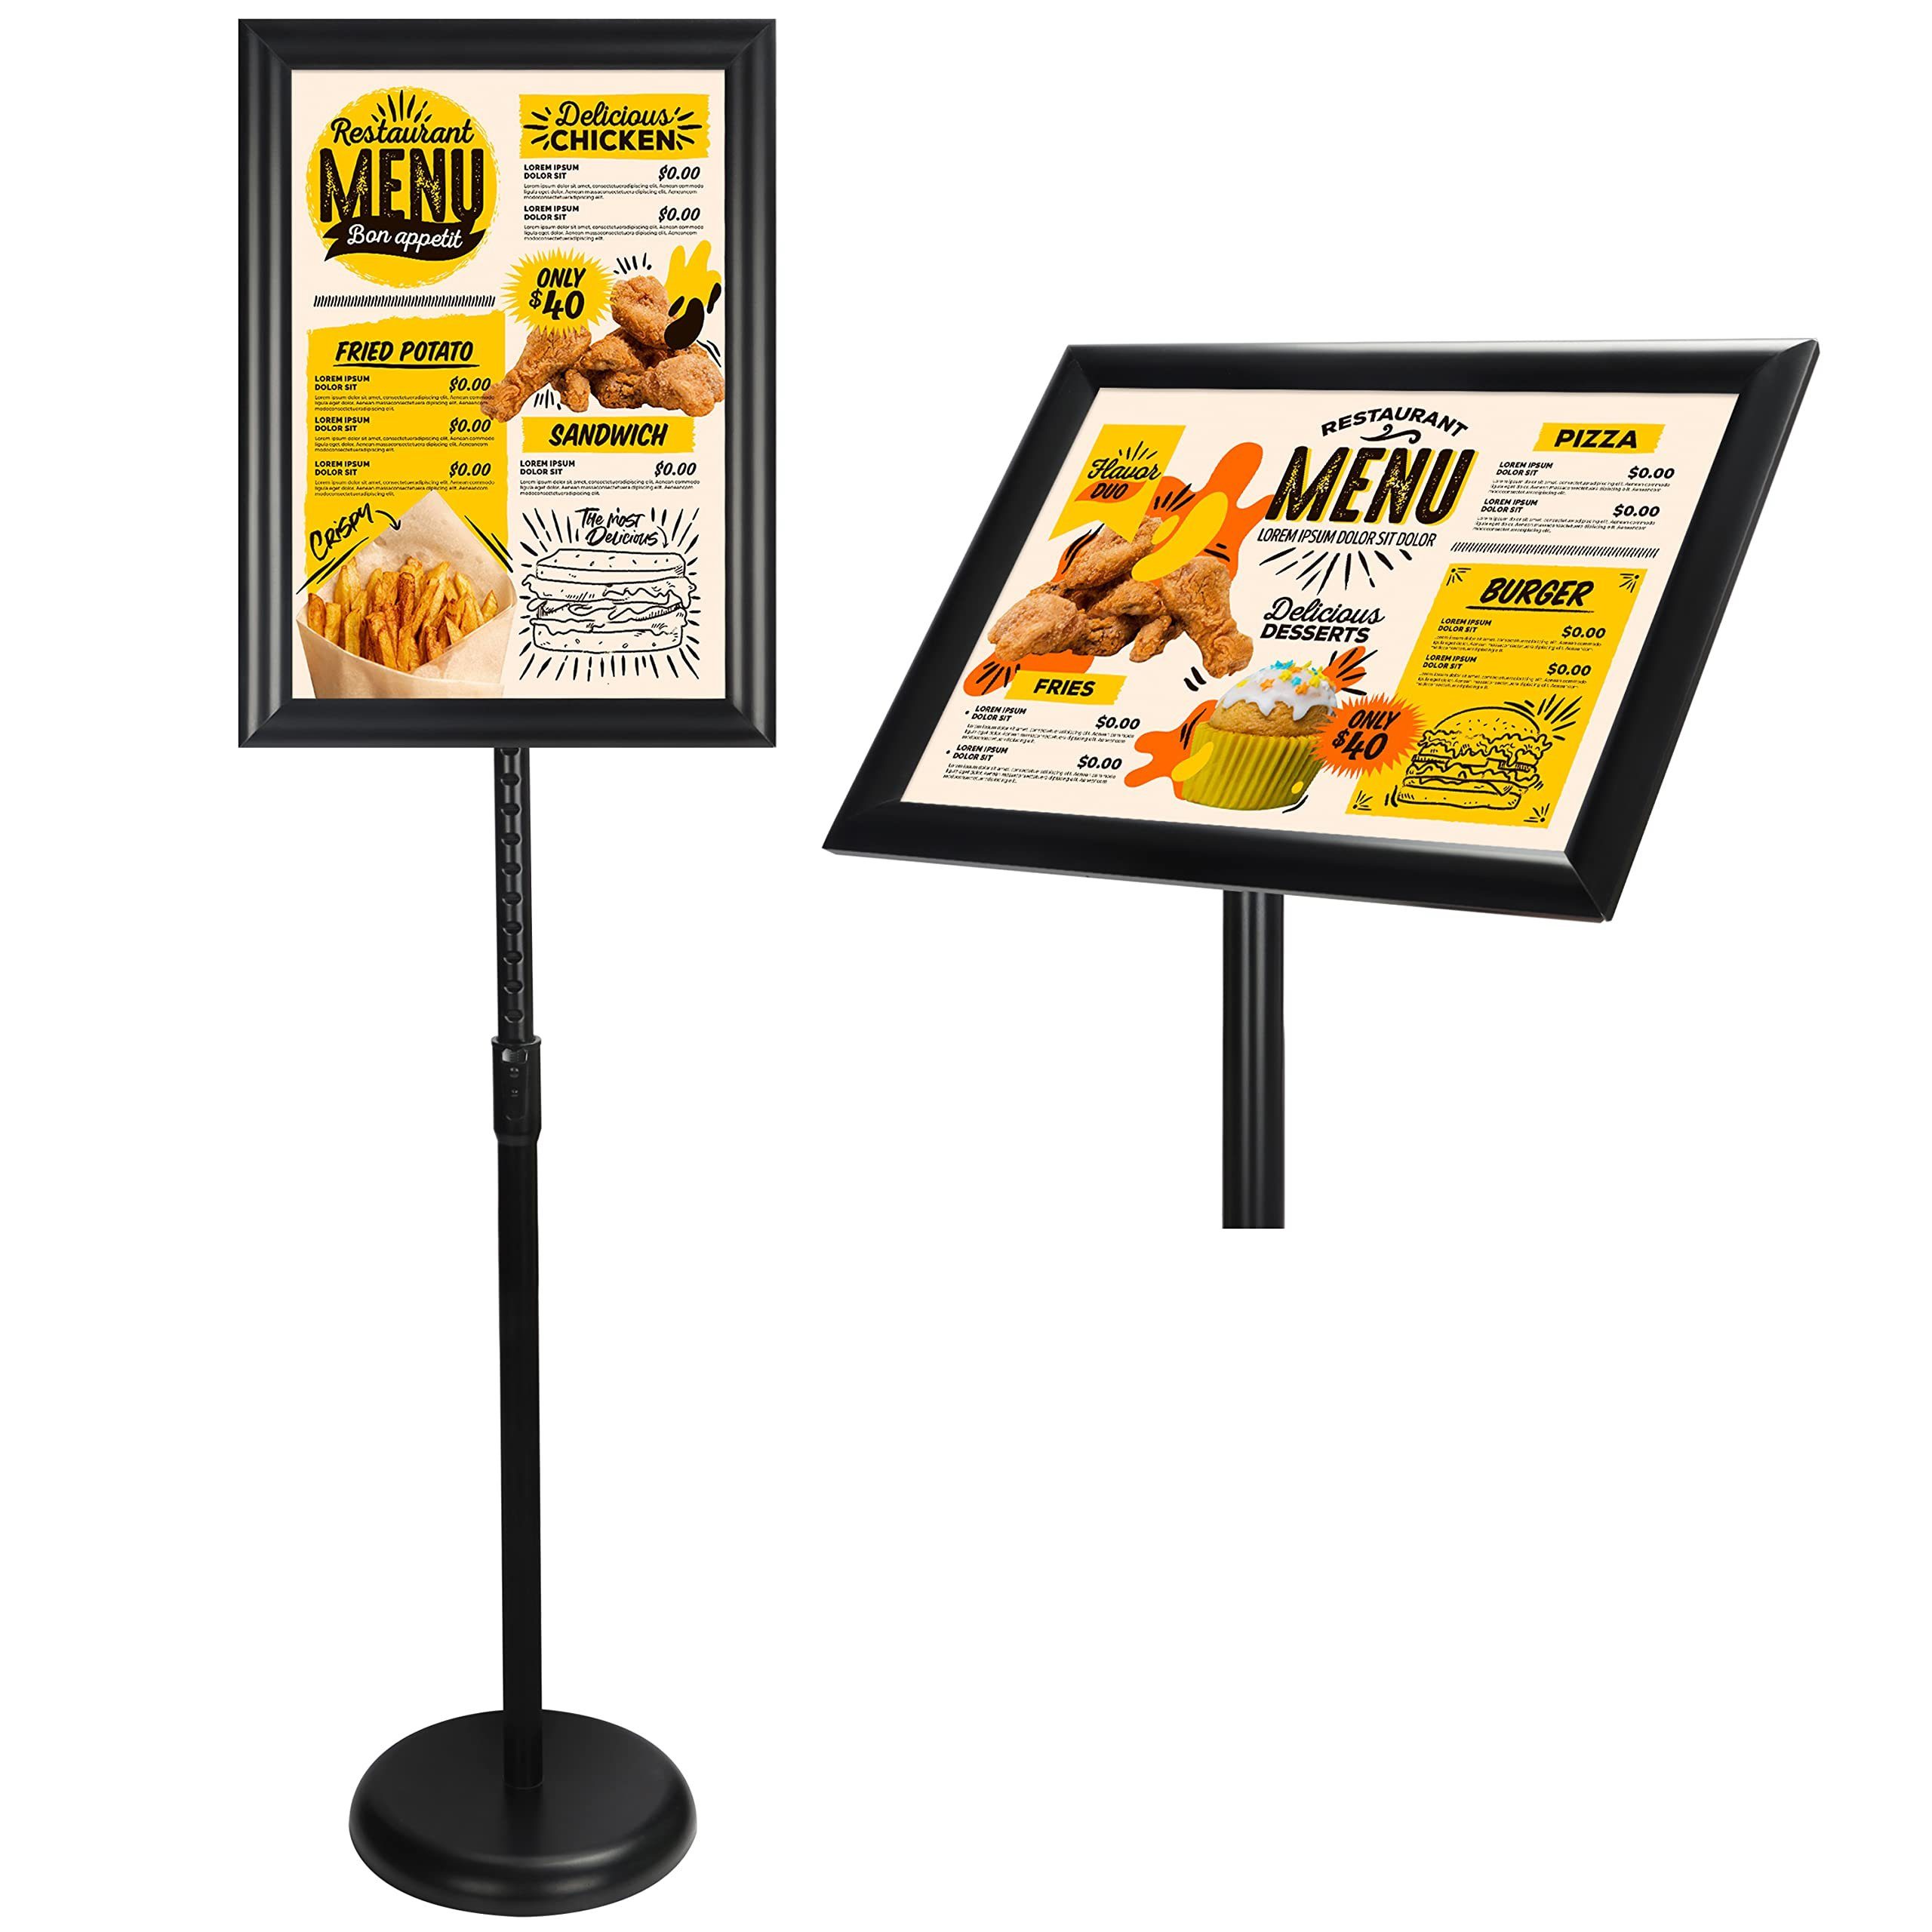 Belle Vous View Cover Schwarzer A3 Plakathalter, Black A3 Aluminum Poster Holder for Weddings, Events, Retail, Menus